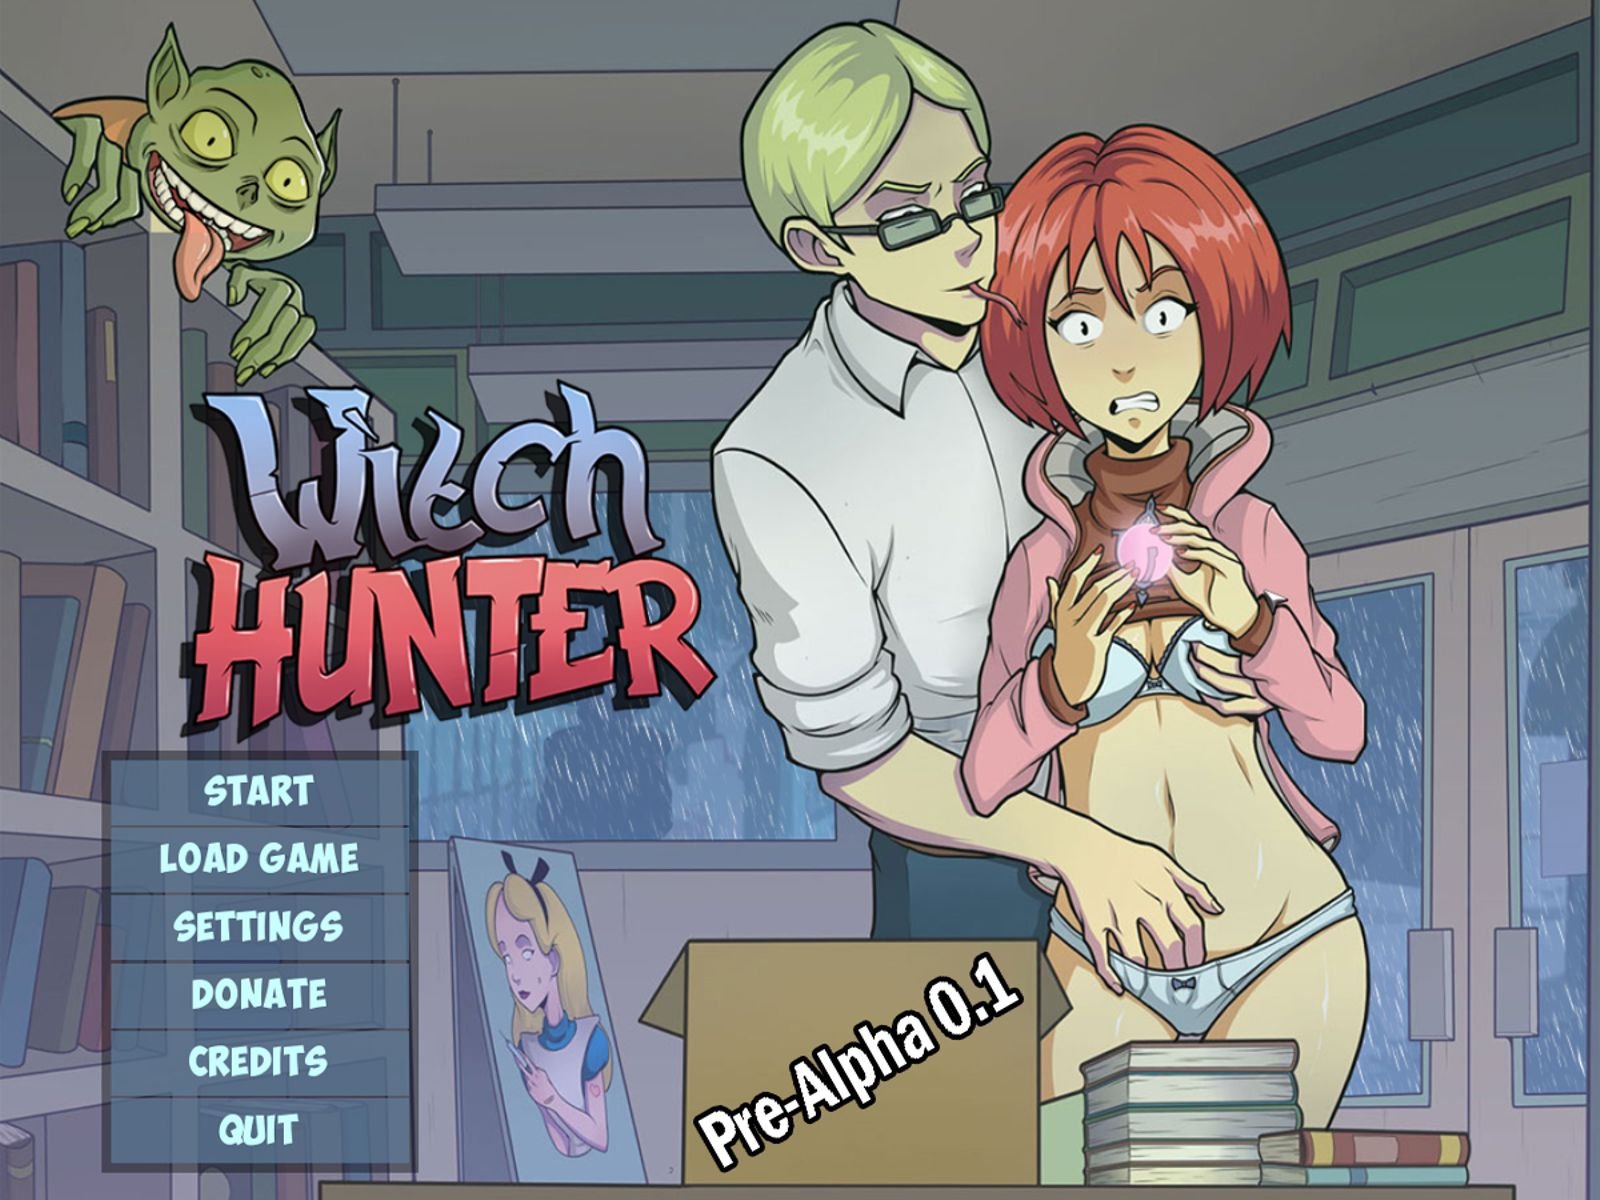 Witch Hunter 0.1 Public release